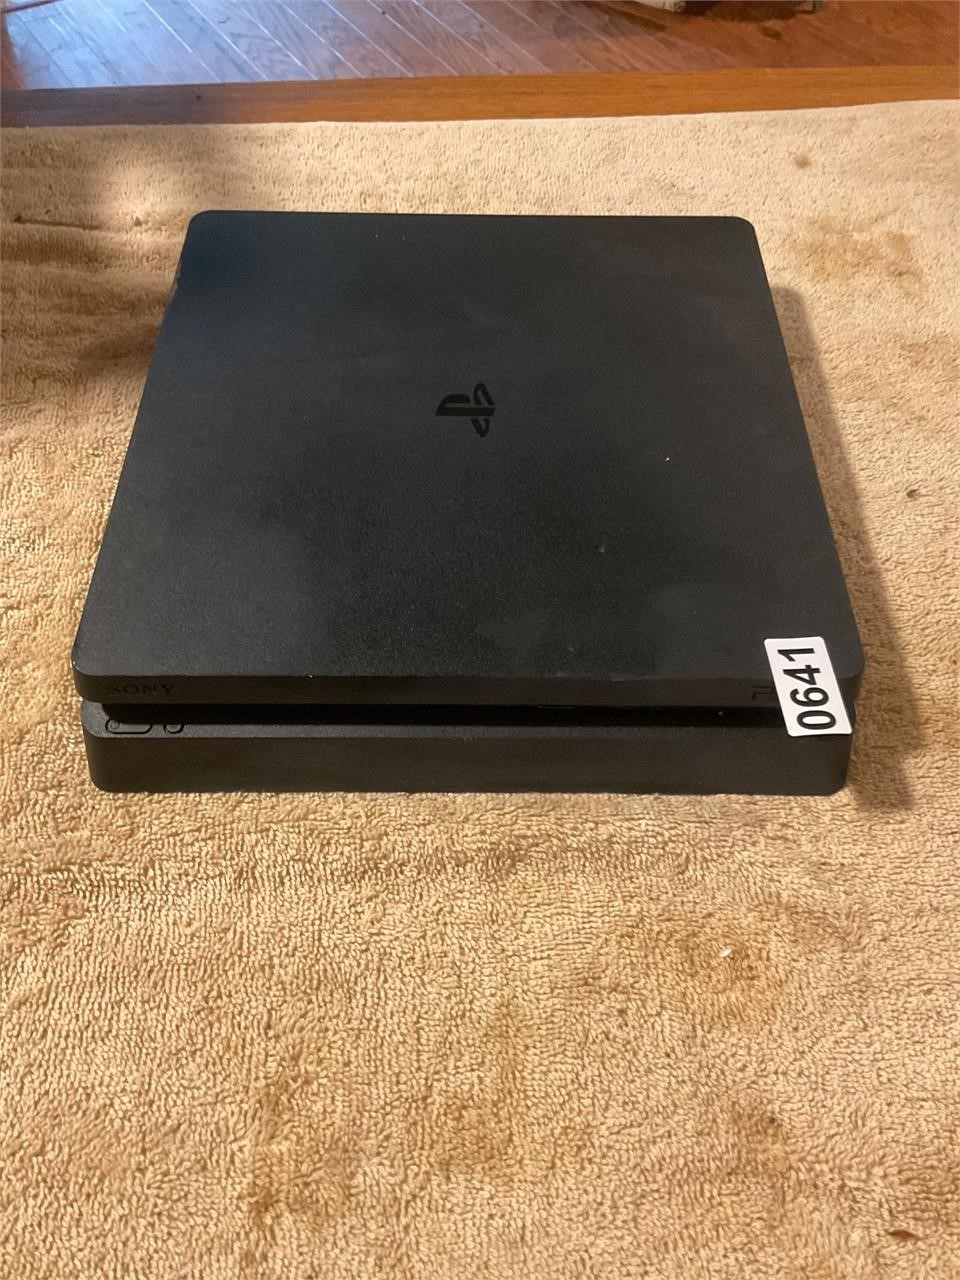 Playstation console- no control or power supply